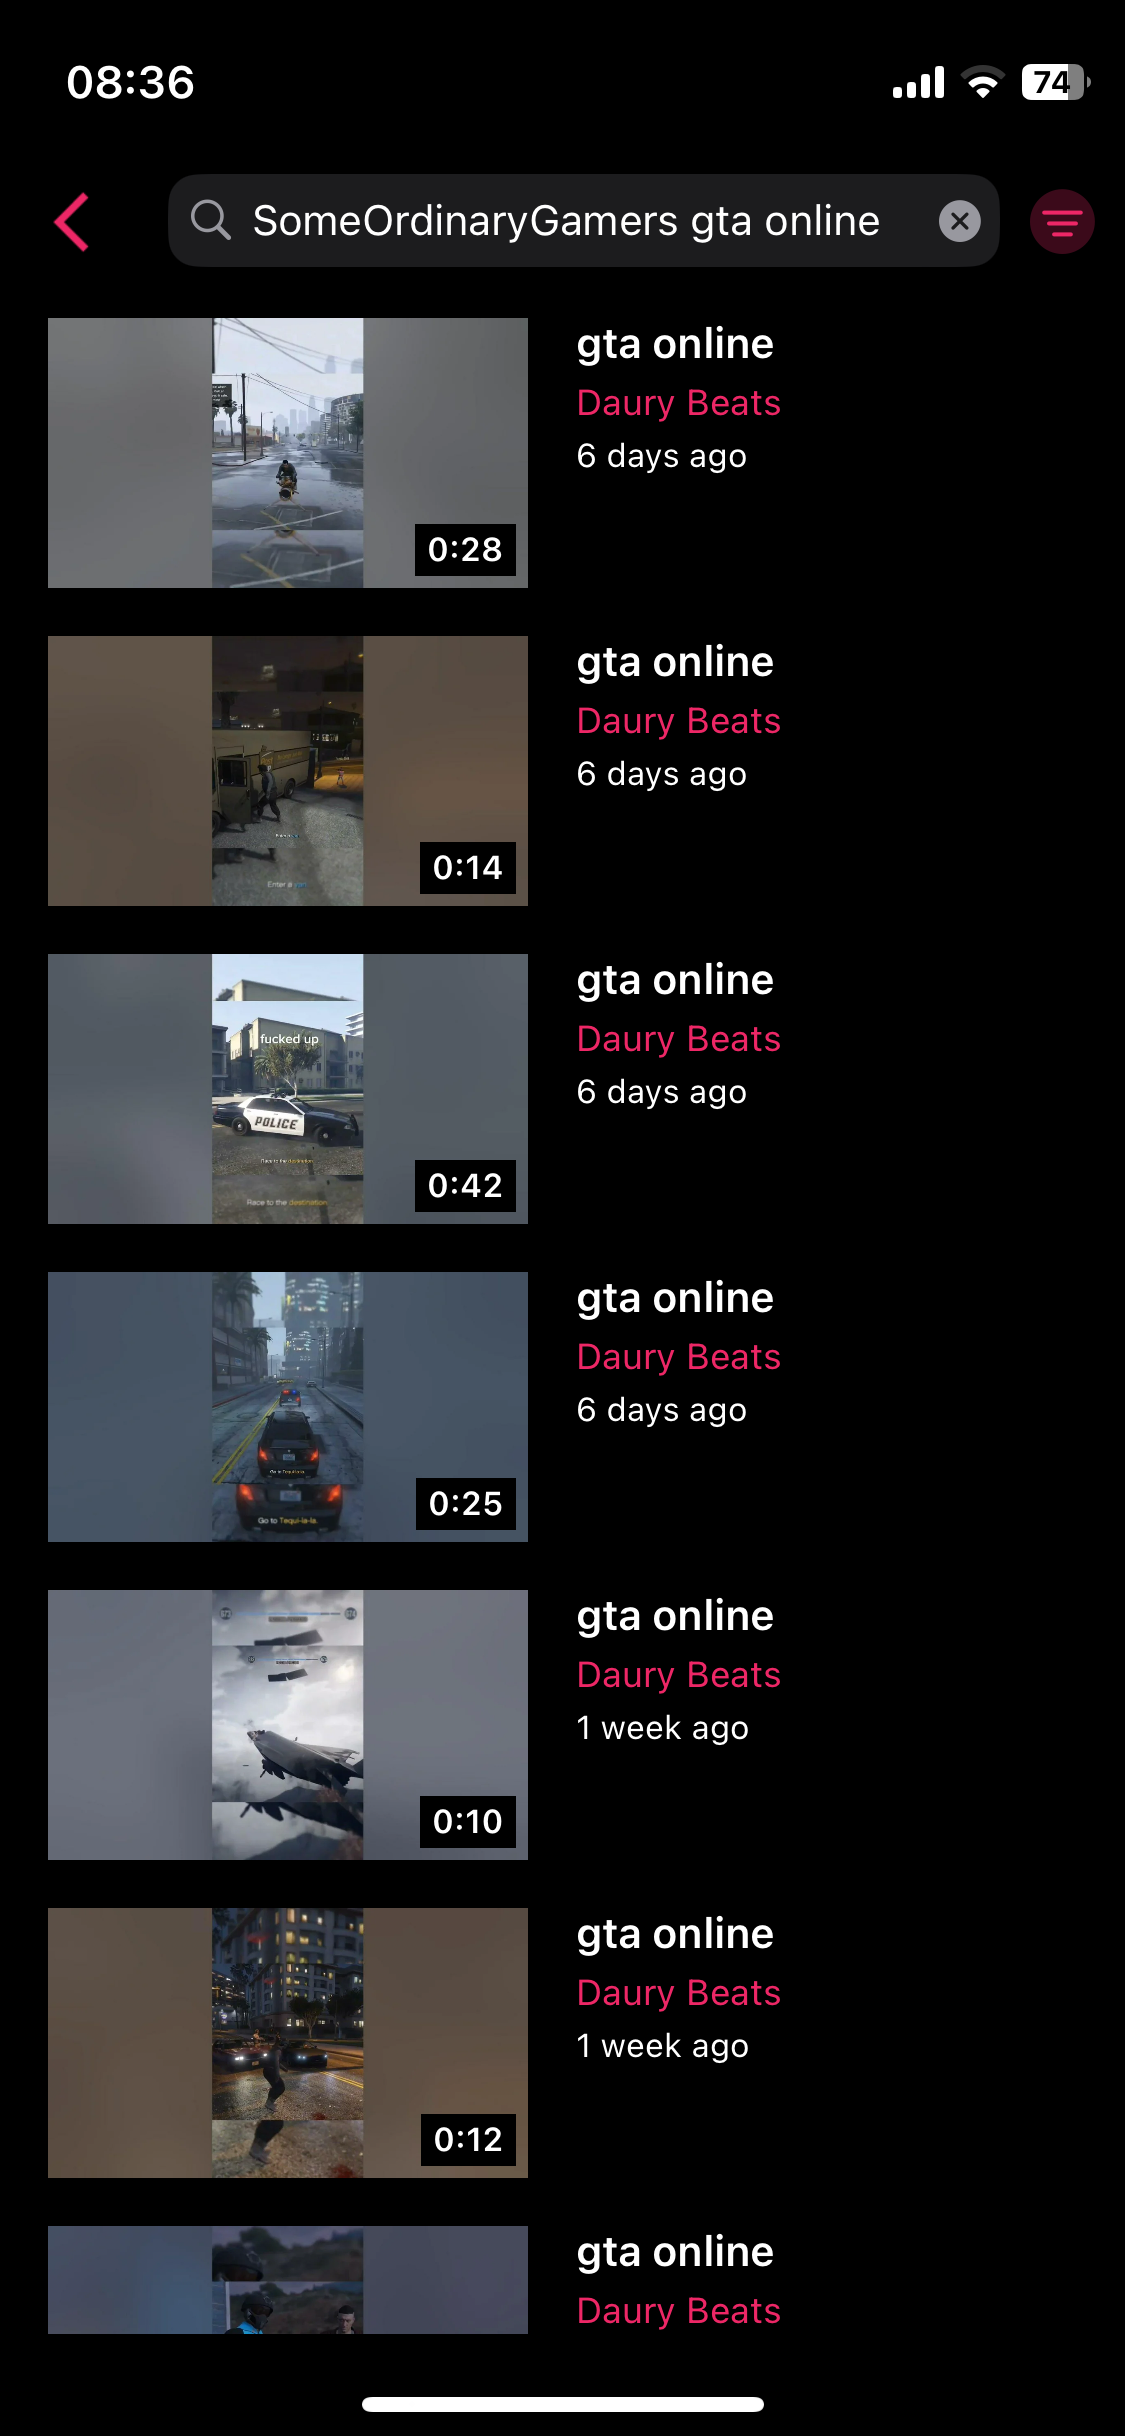 example of searching for SomeOrdinaryGamers GTA Online video, but showing random videos, assuming Odysee is trying its best but fails to fetch content of such search terms...